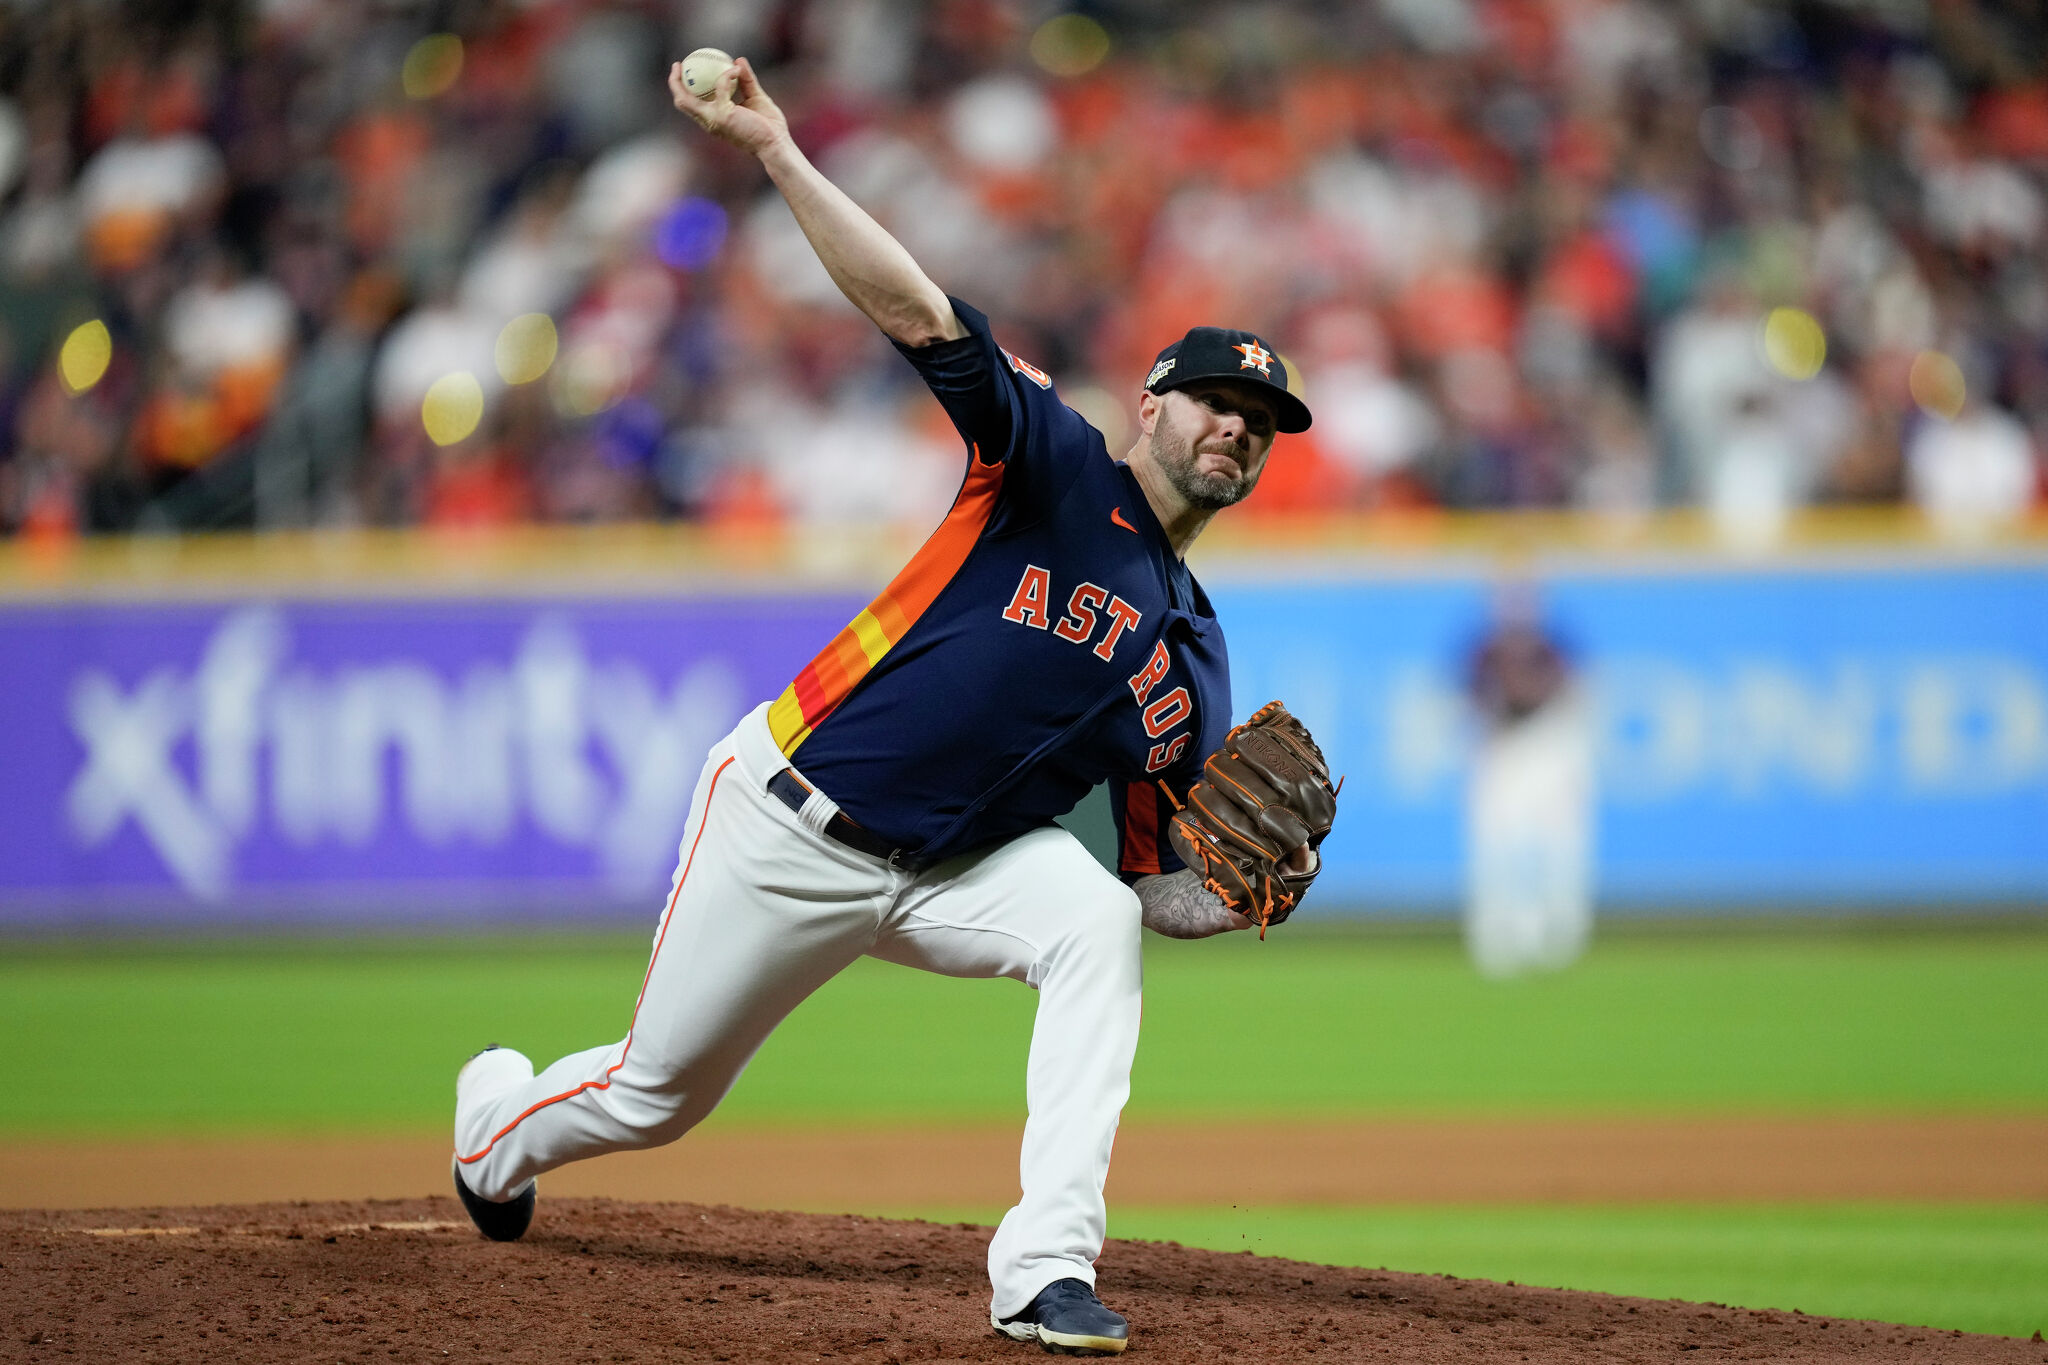 Ryan Pressly is becoming predictable: 'Slider-happy' closer hits